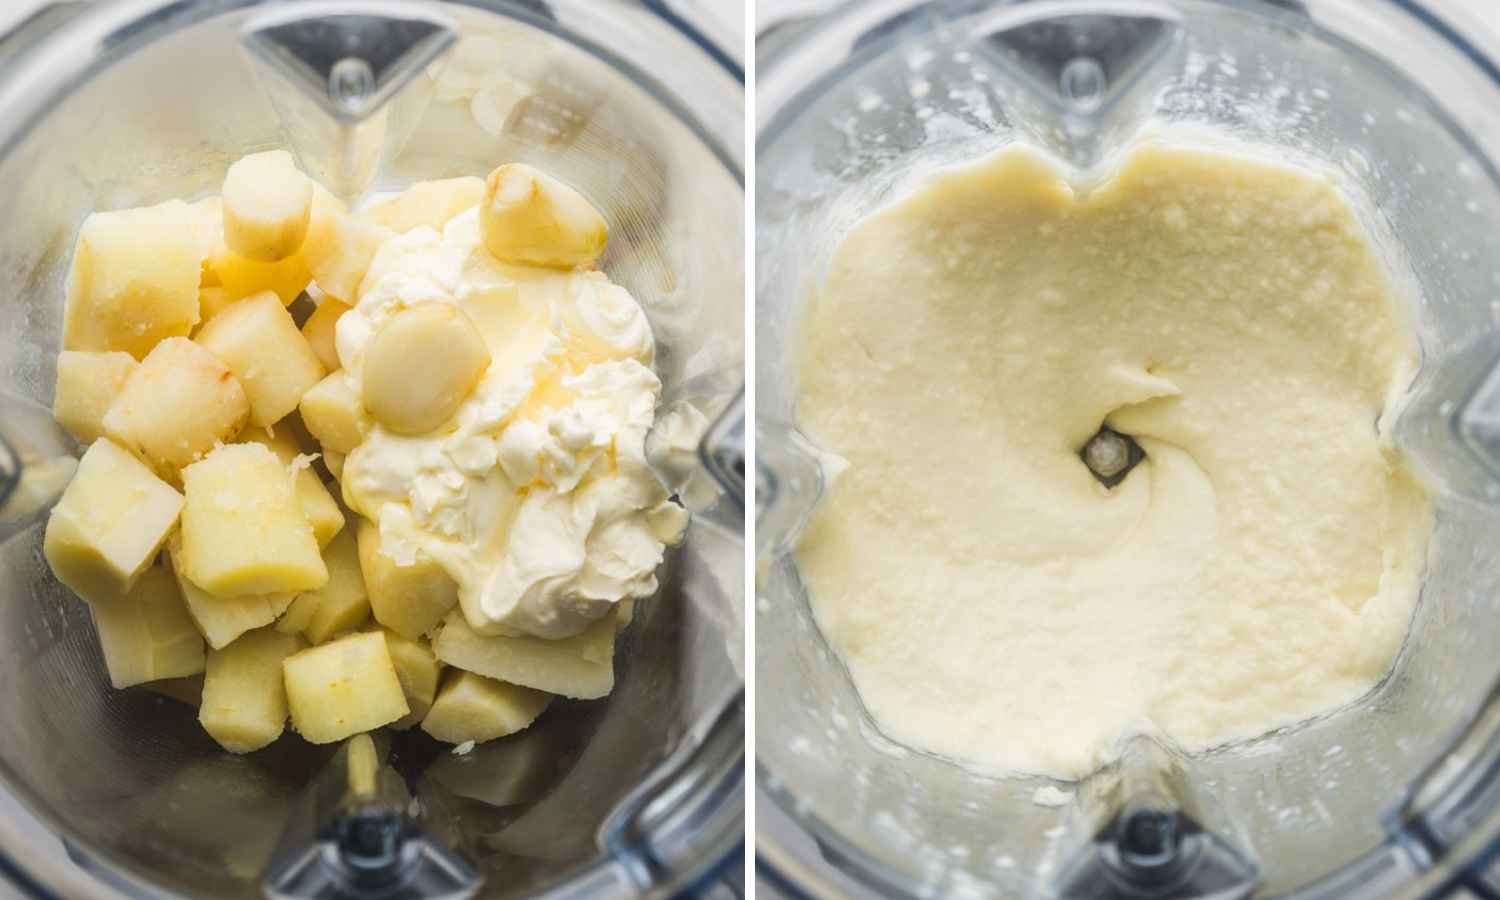 2 images showing before and after blending the parsnips in a blender jug